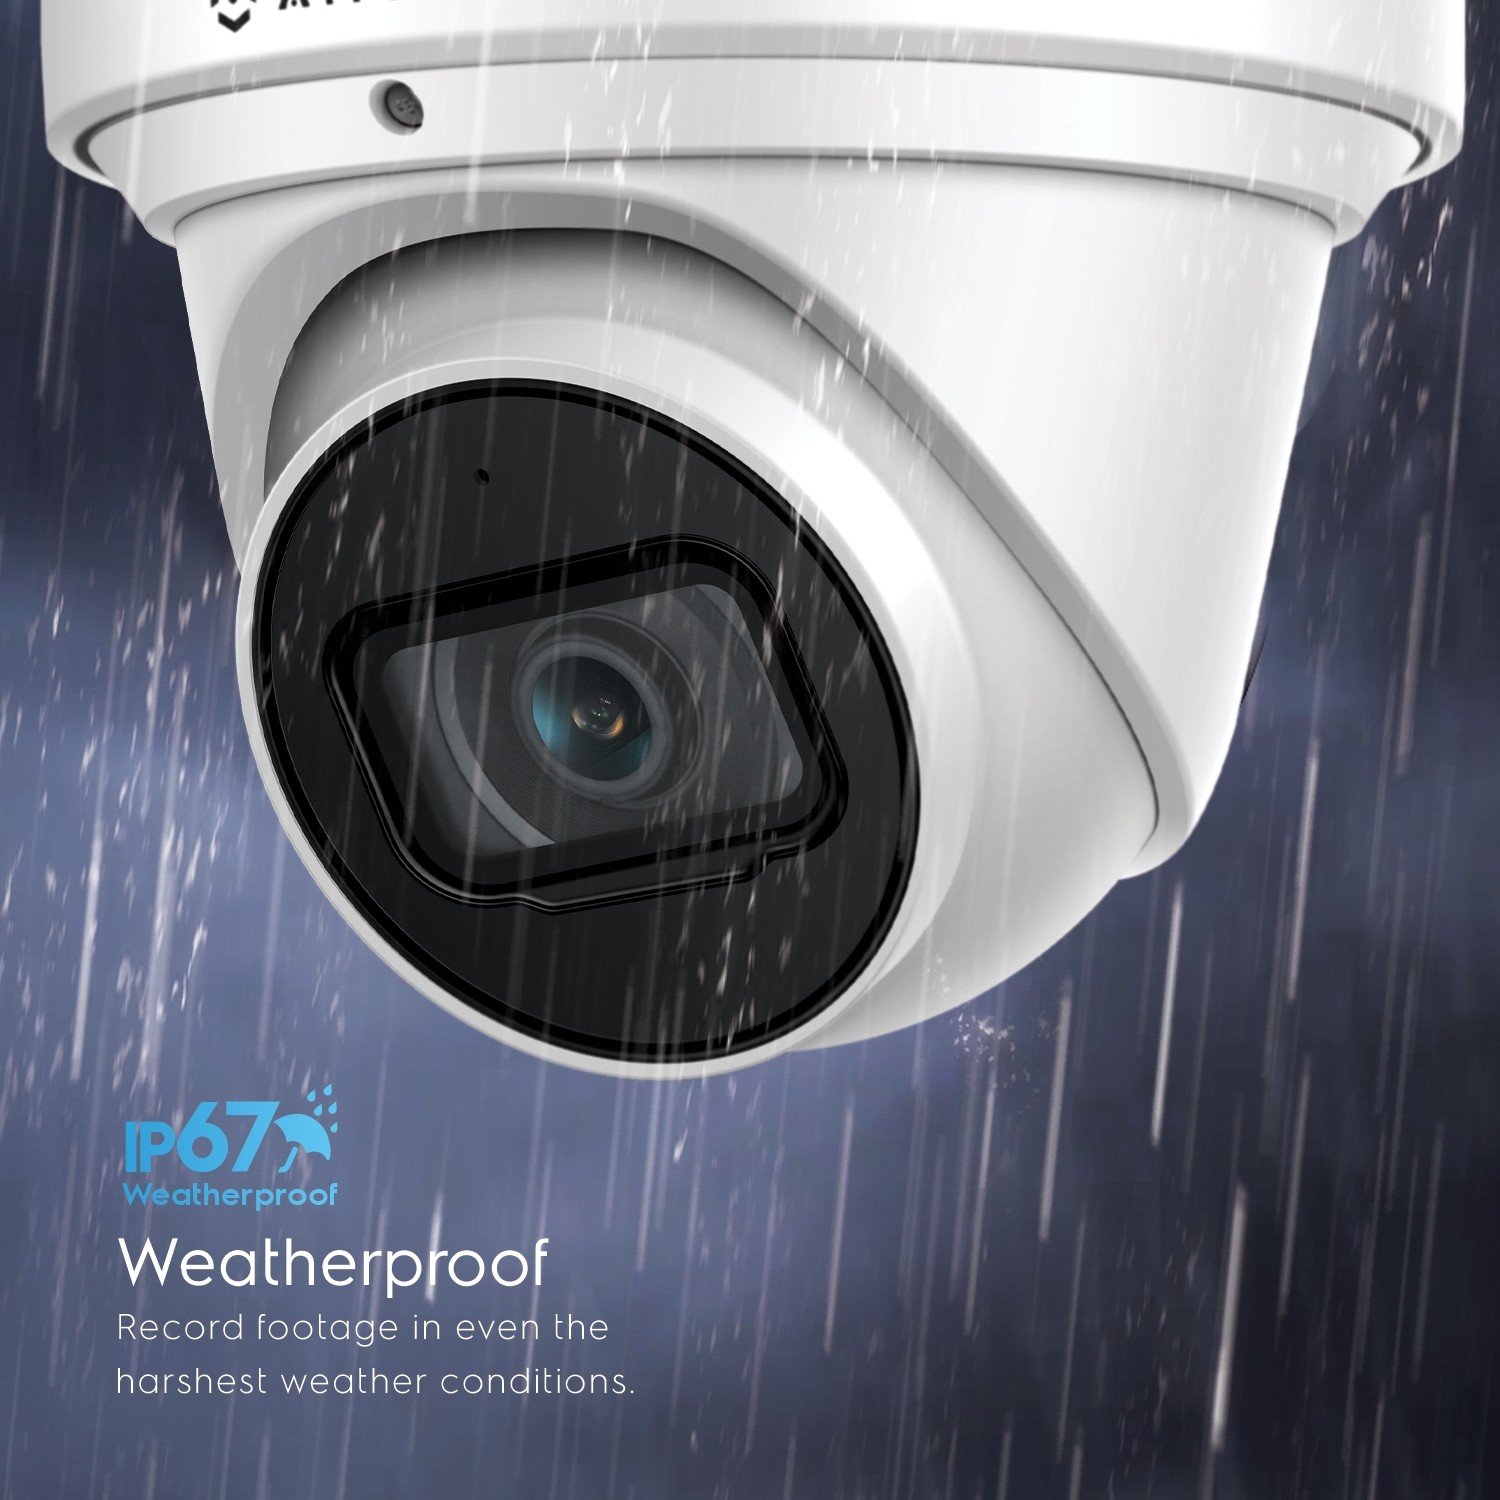 Amcrest UltraHD 4K (8MP) Outdoor Security IP Turret PoE Camera, 3840x2160,  98ft NightVision, 2.8mm Lens, IP67 Weatherproof, MicroSD Recording (256GB),  